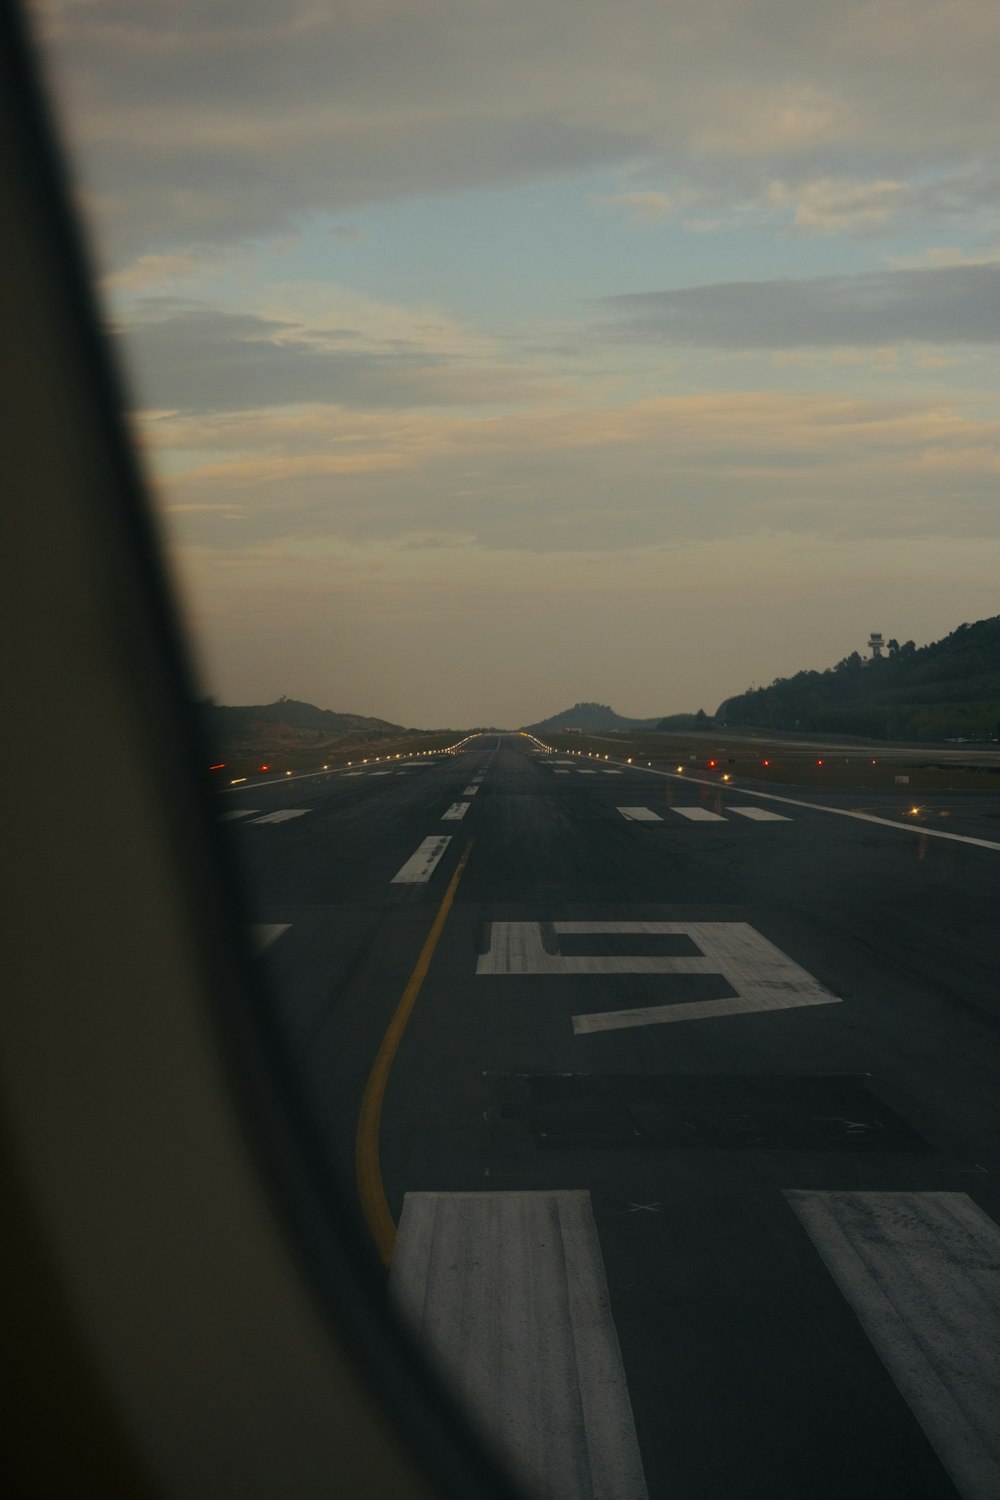 a view of a runway from a plane window